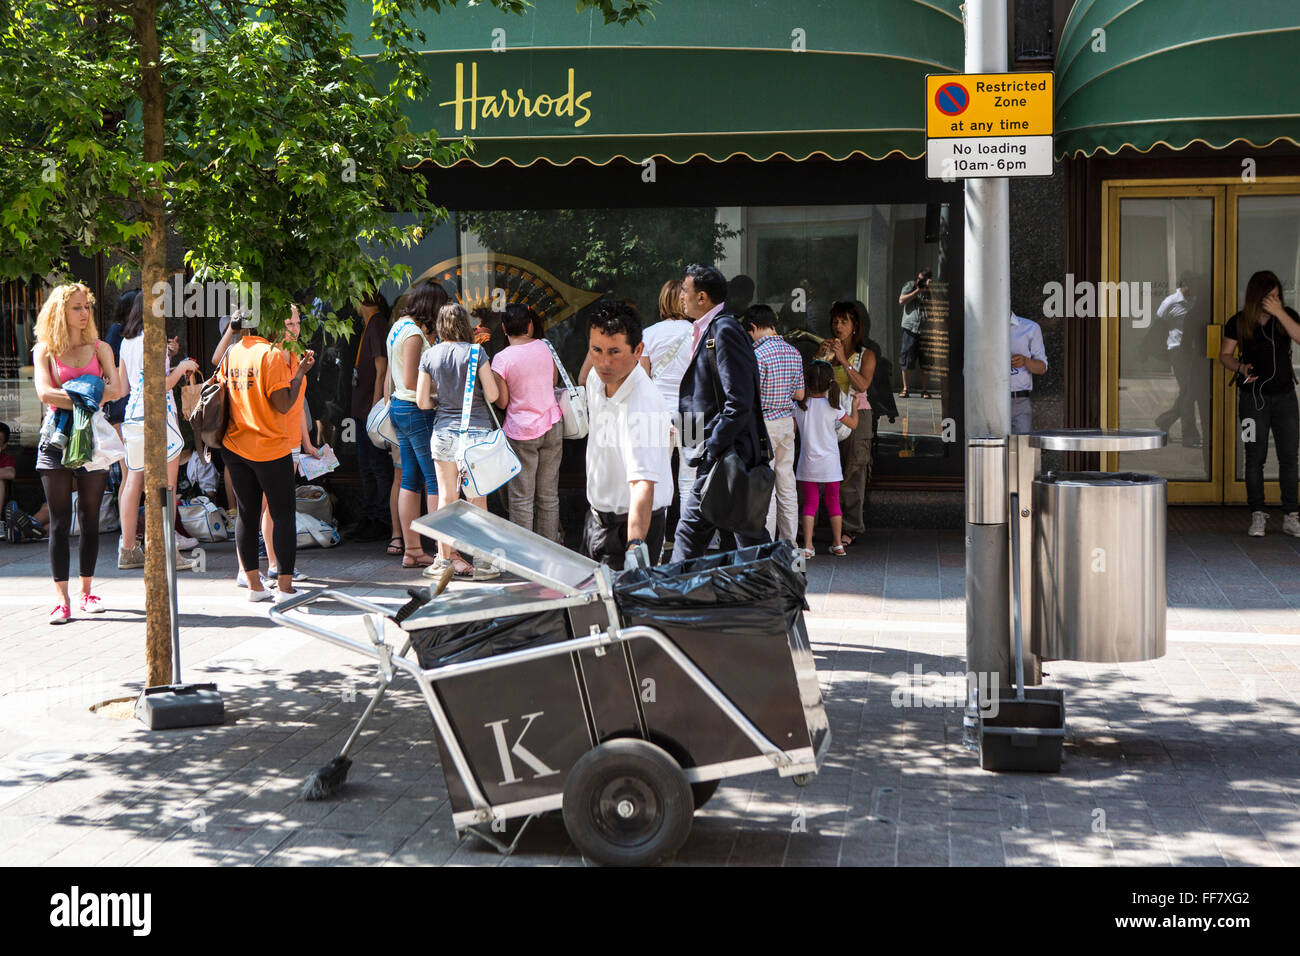 A male street cleaner collecting rubbish and litter outside the world famous and iconic Harrods department store in Knightsbridge, London, United Kingdom.  Groups of tourists are in the background looking at the shop’s window displays being guided around London by Embassy Staff. Stock Photo